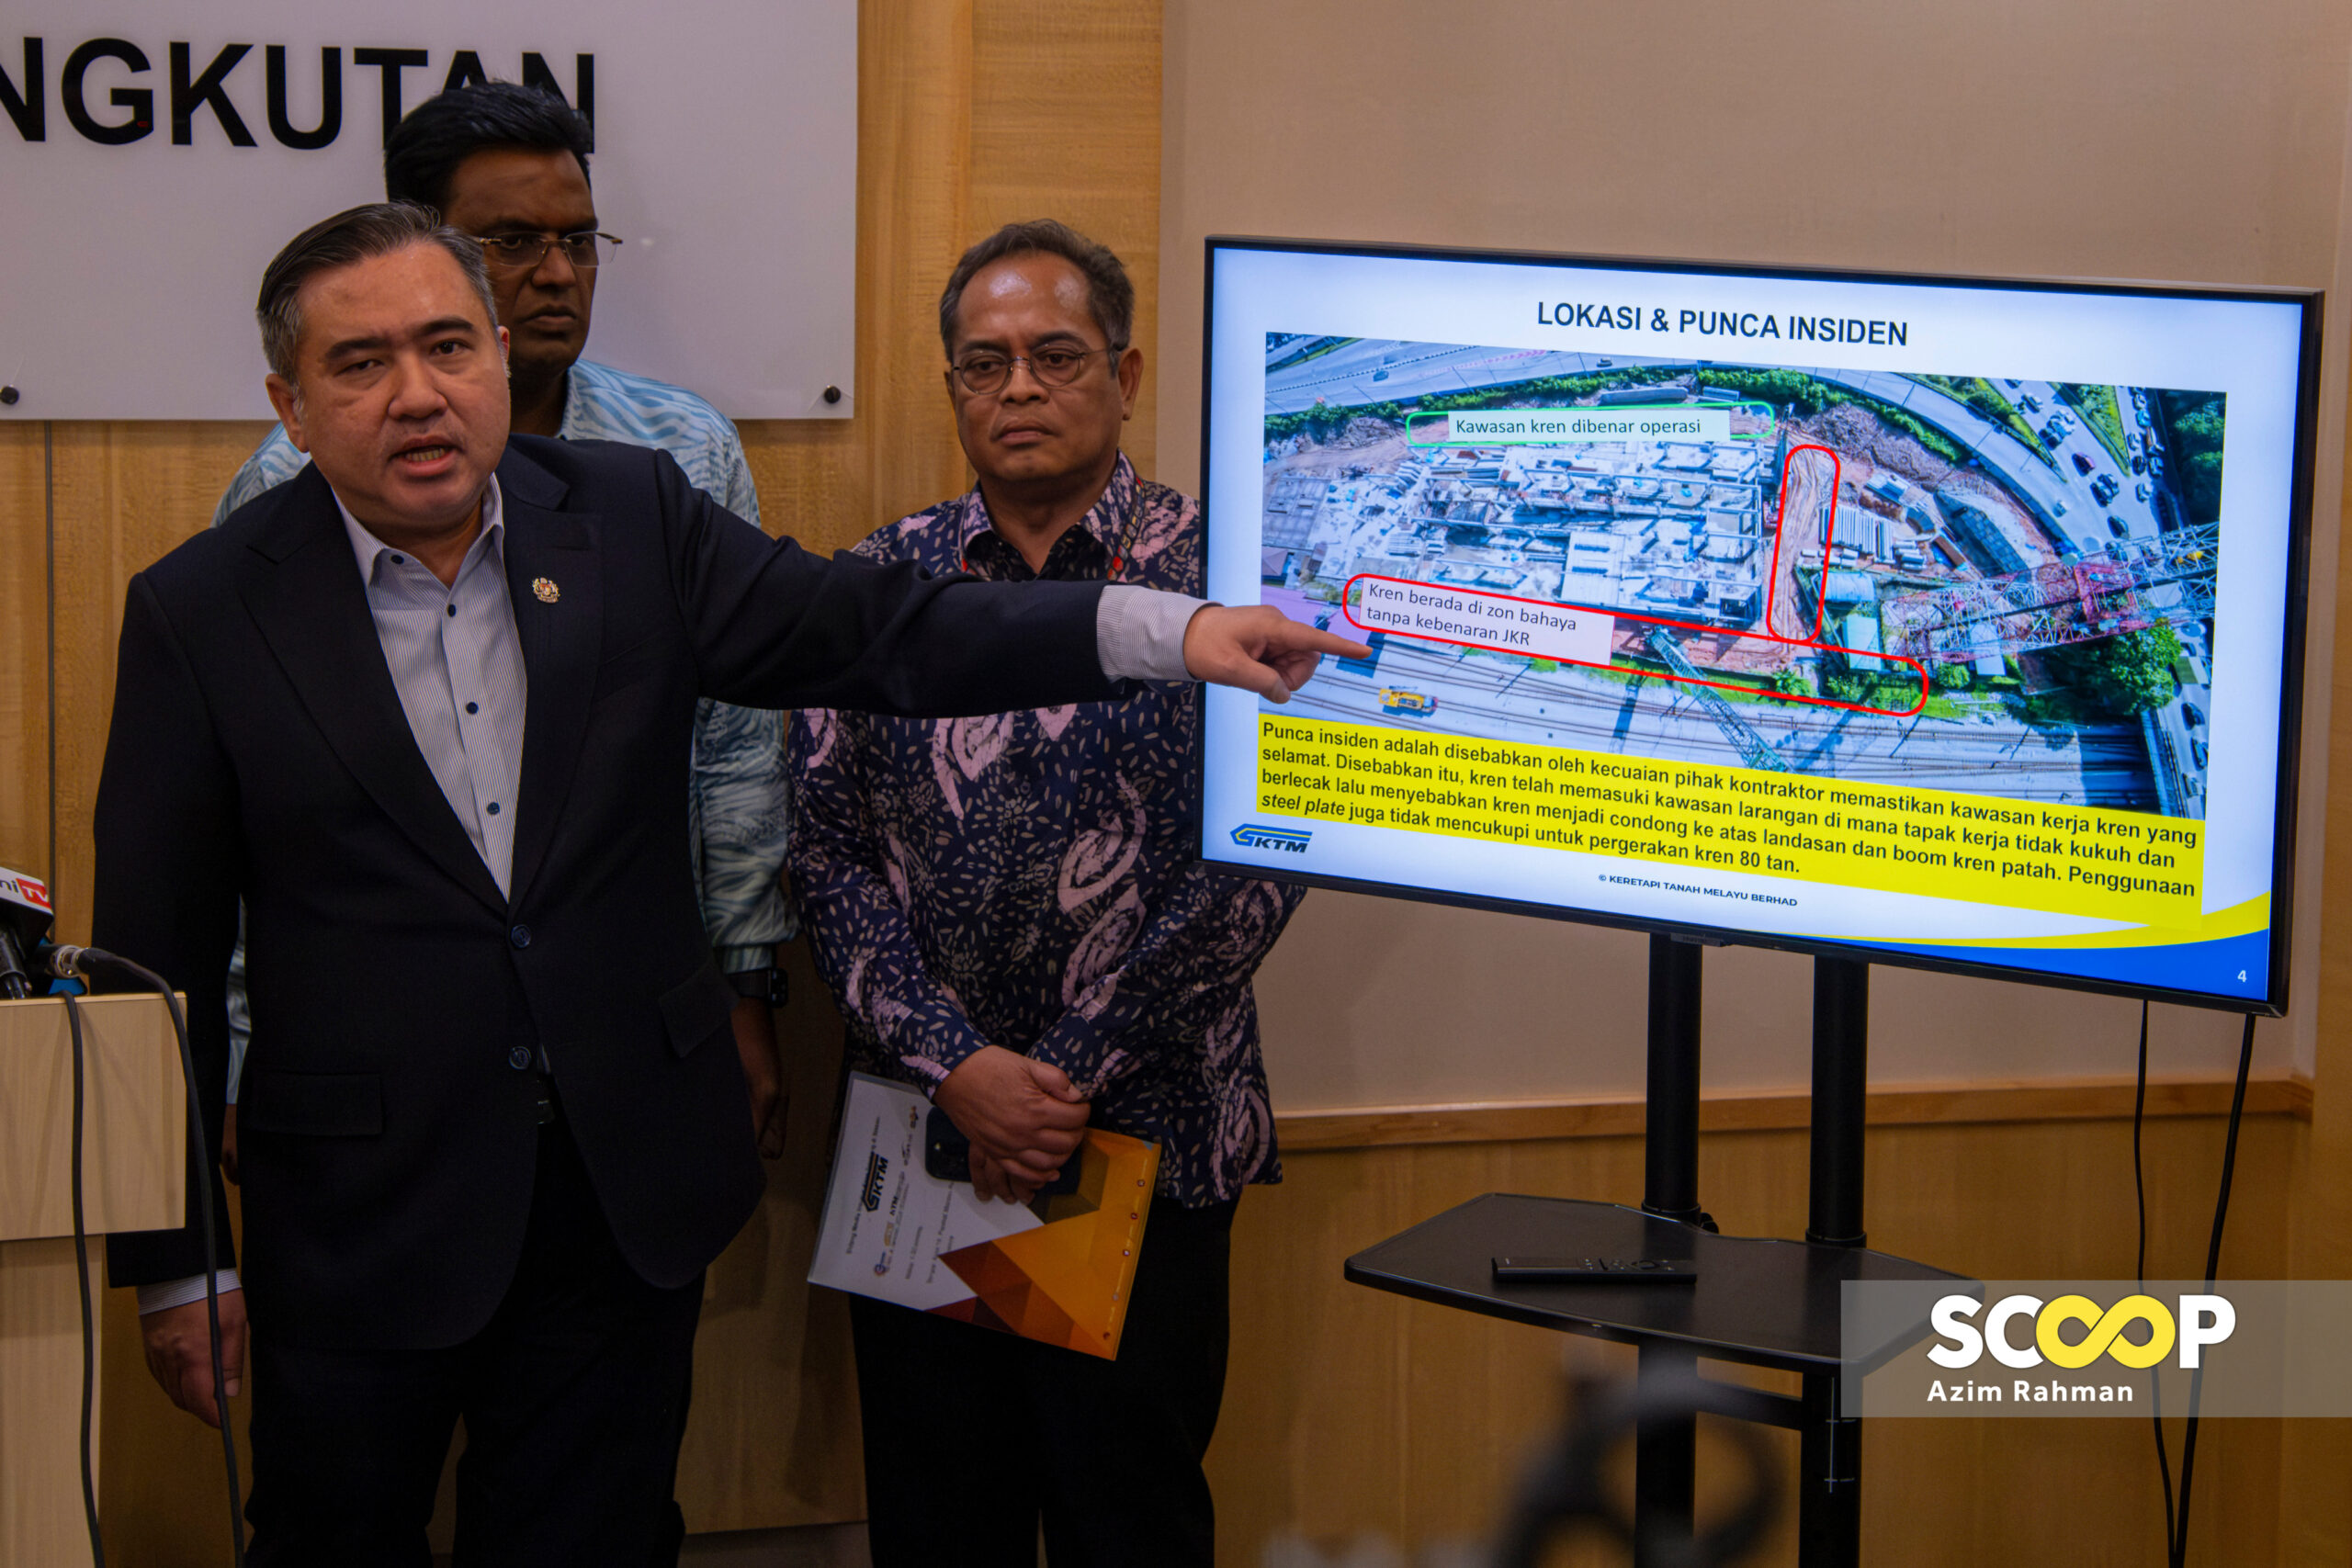 Rawang crane collapse a ‘big and serious crime’, contractor entered restricted area: Loke